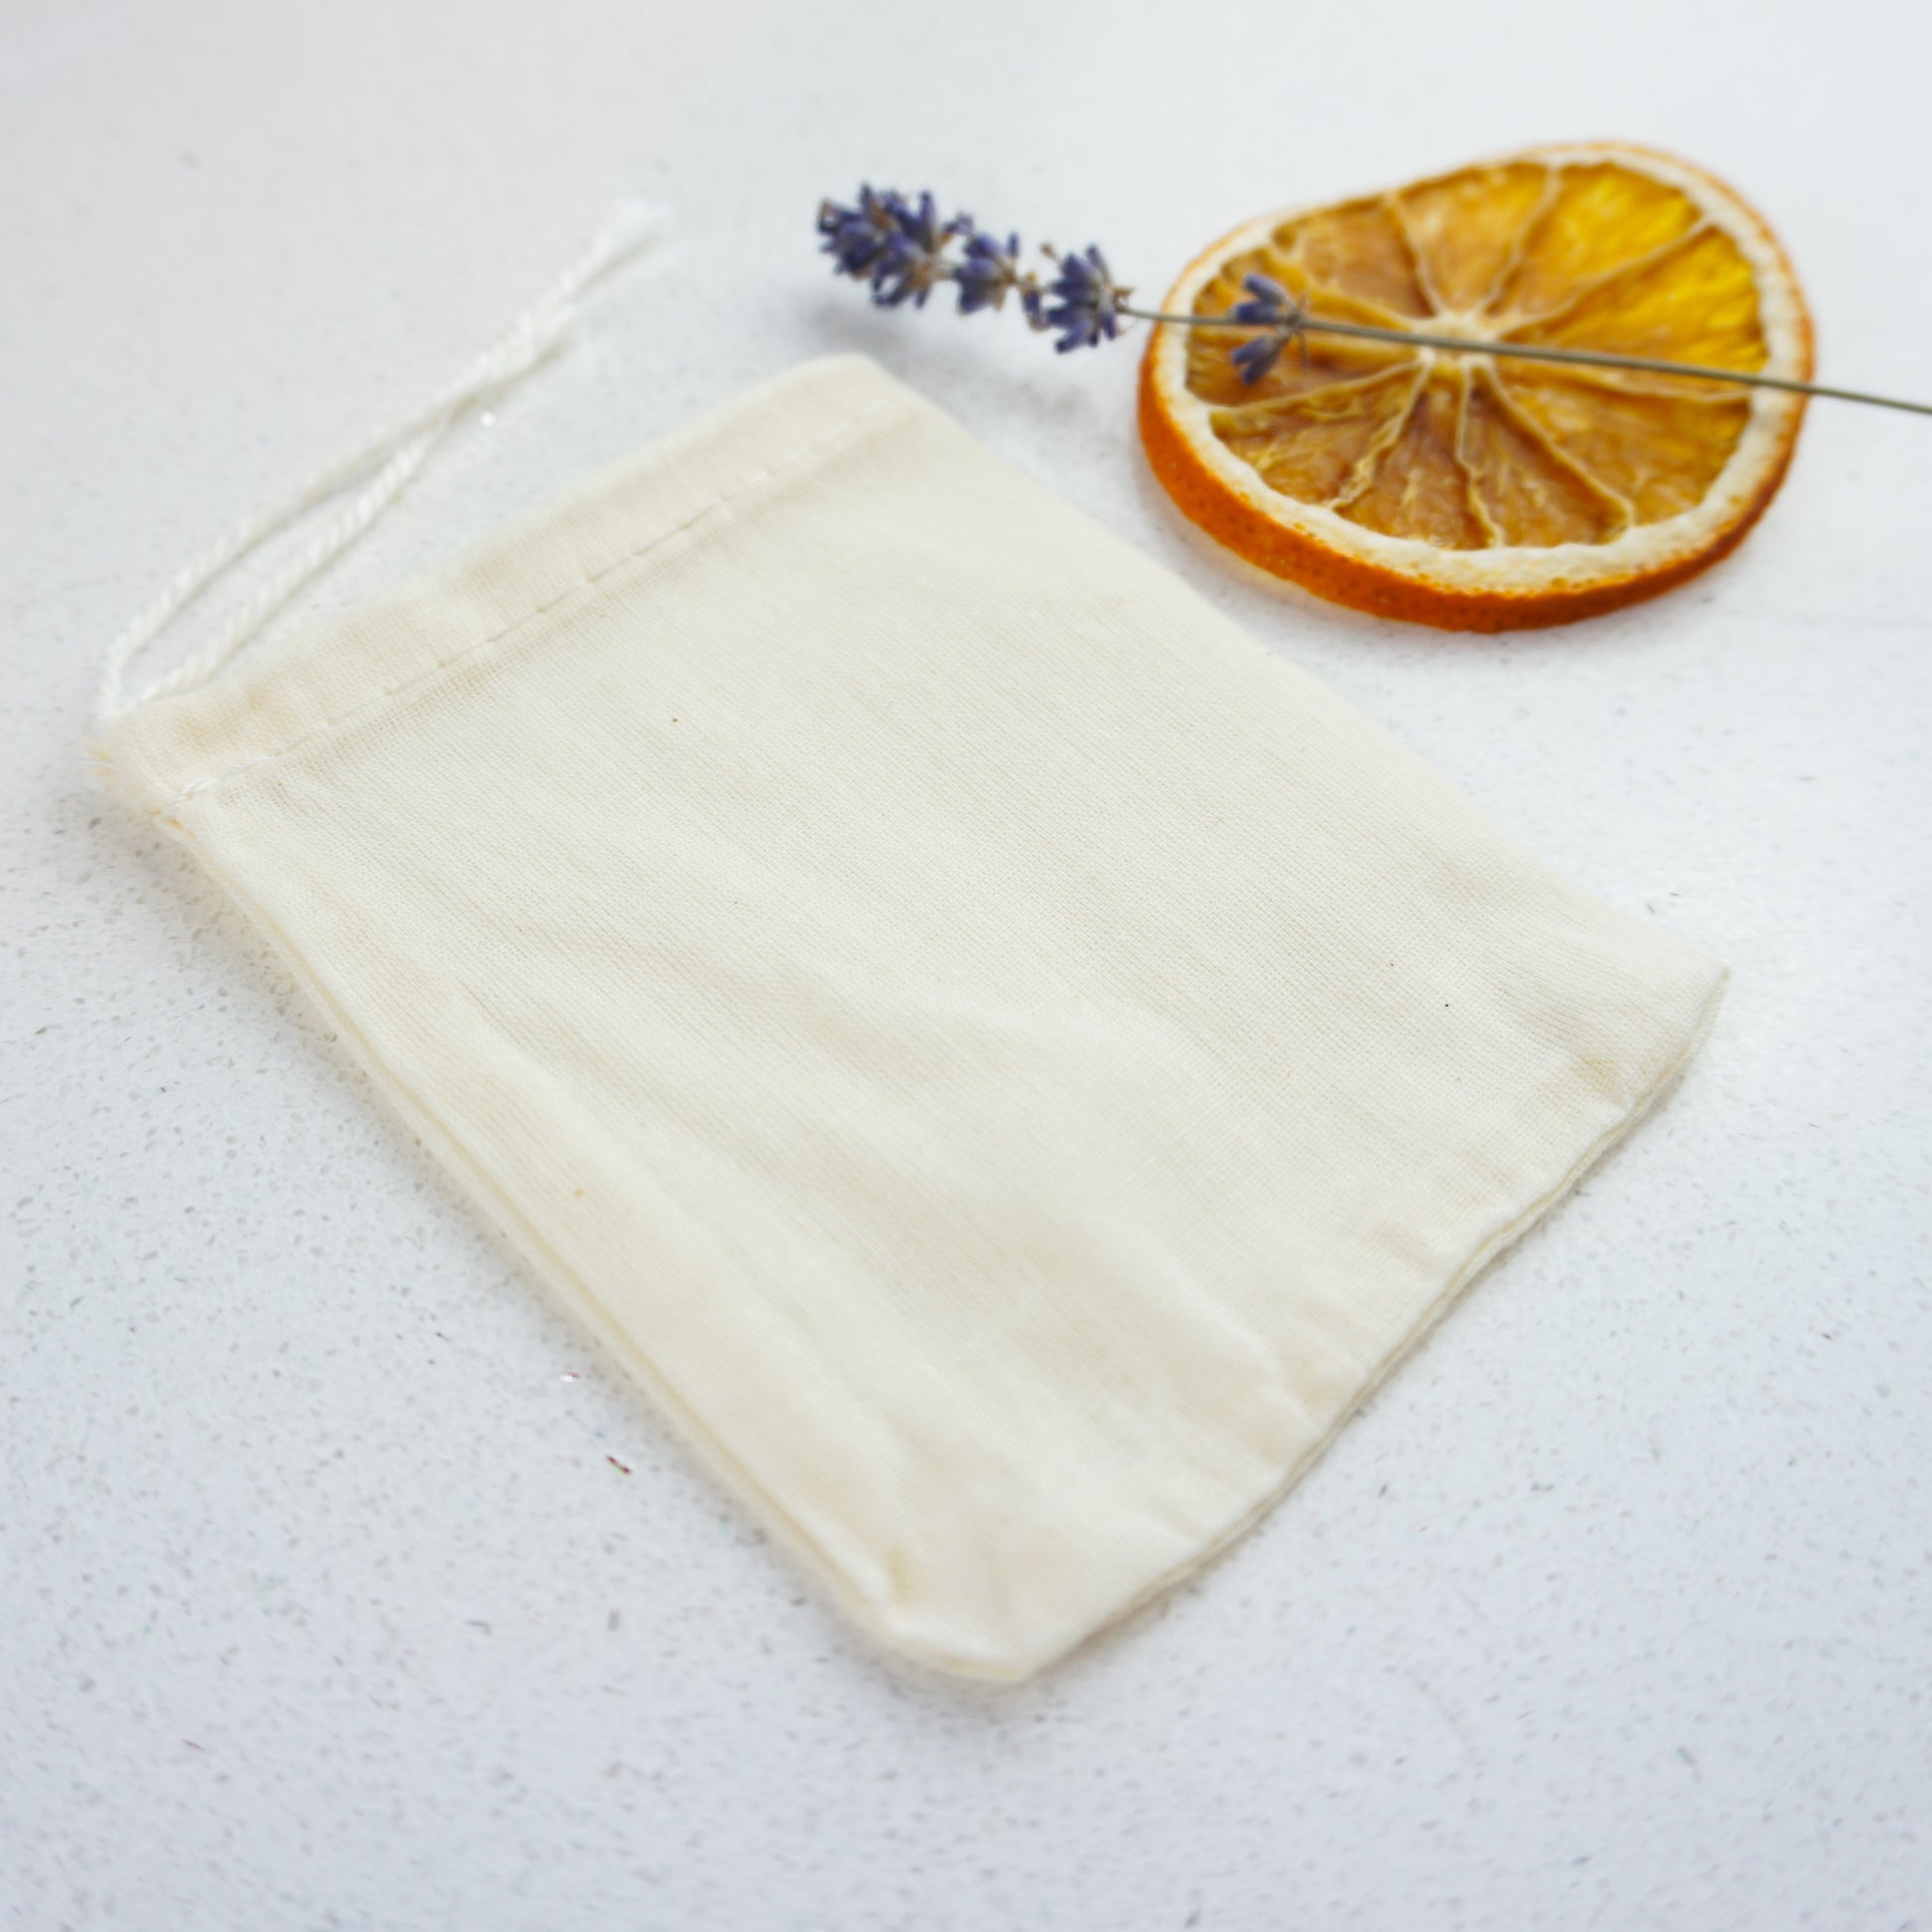 Cotton Muslin Drawstring Bag with a slice of dried lemon and lavender for decoration